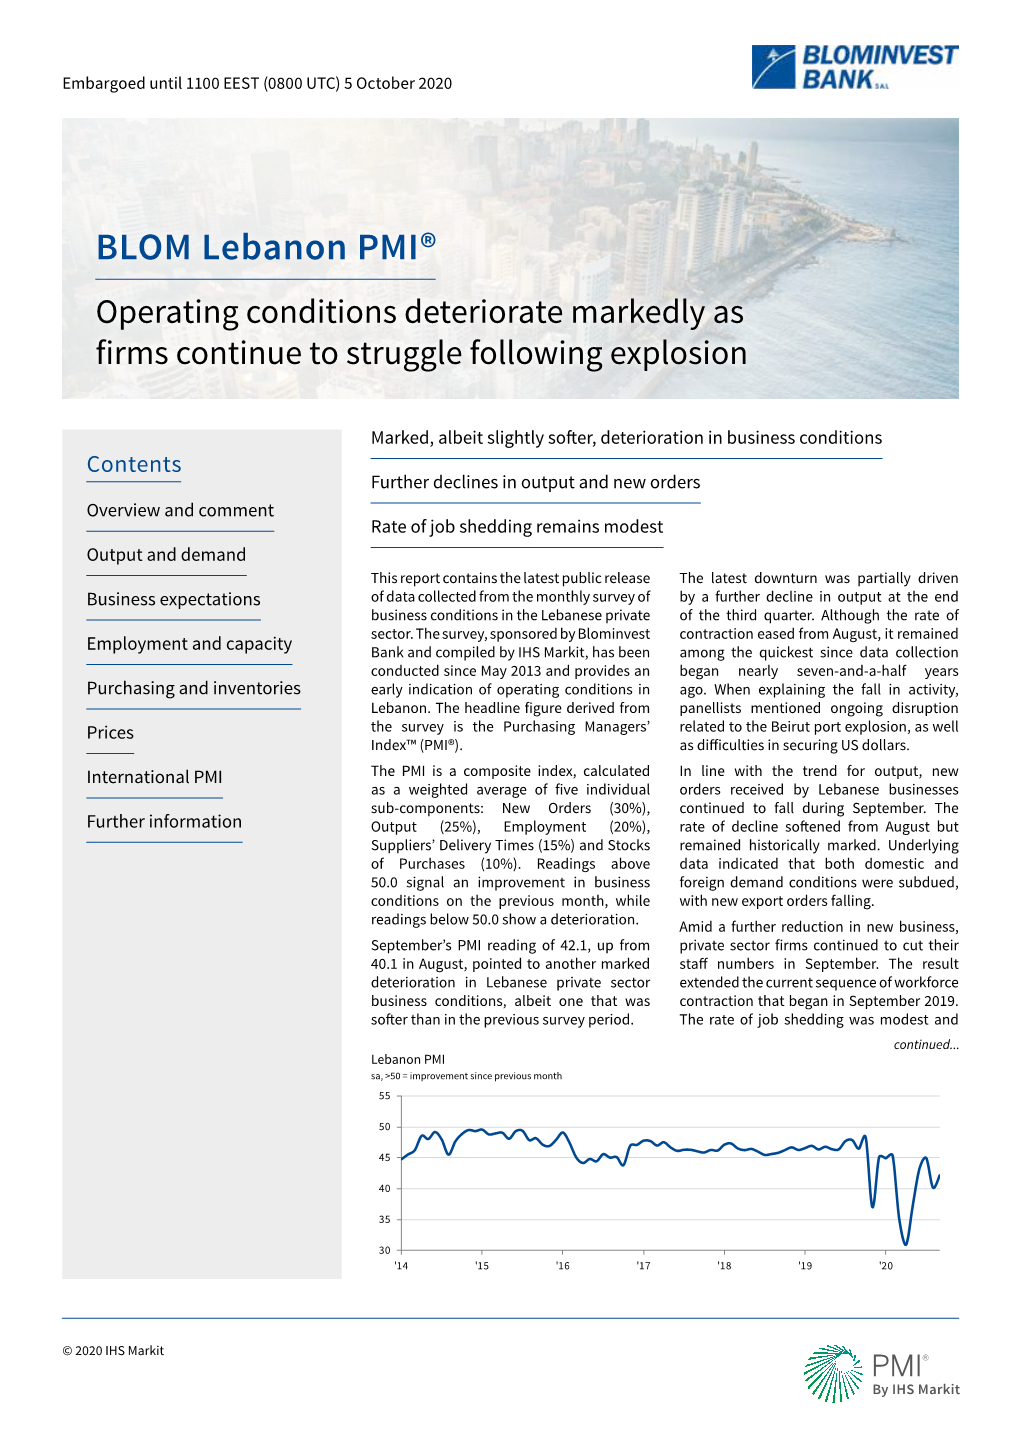 BLOM Lebanon PMI® Operating Conditions Deteriorate Markedly As Firms Continue to Struggle Following Explosion